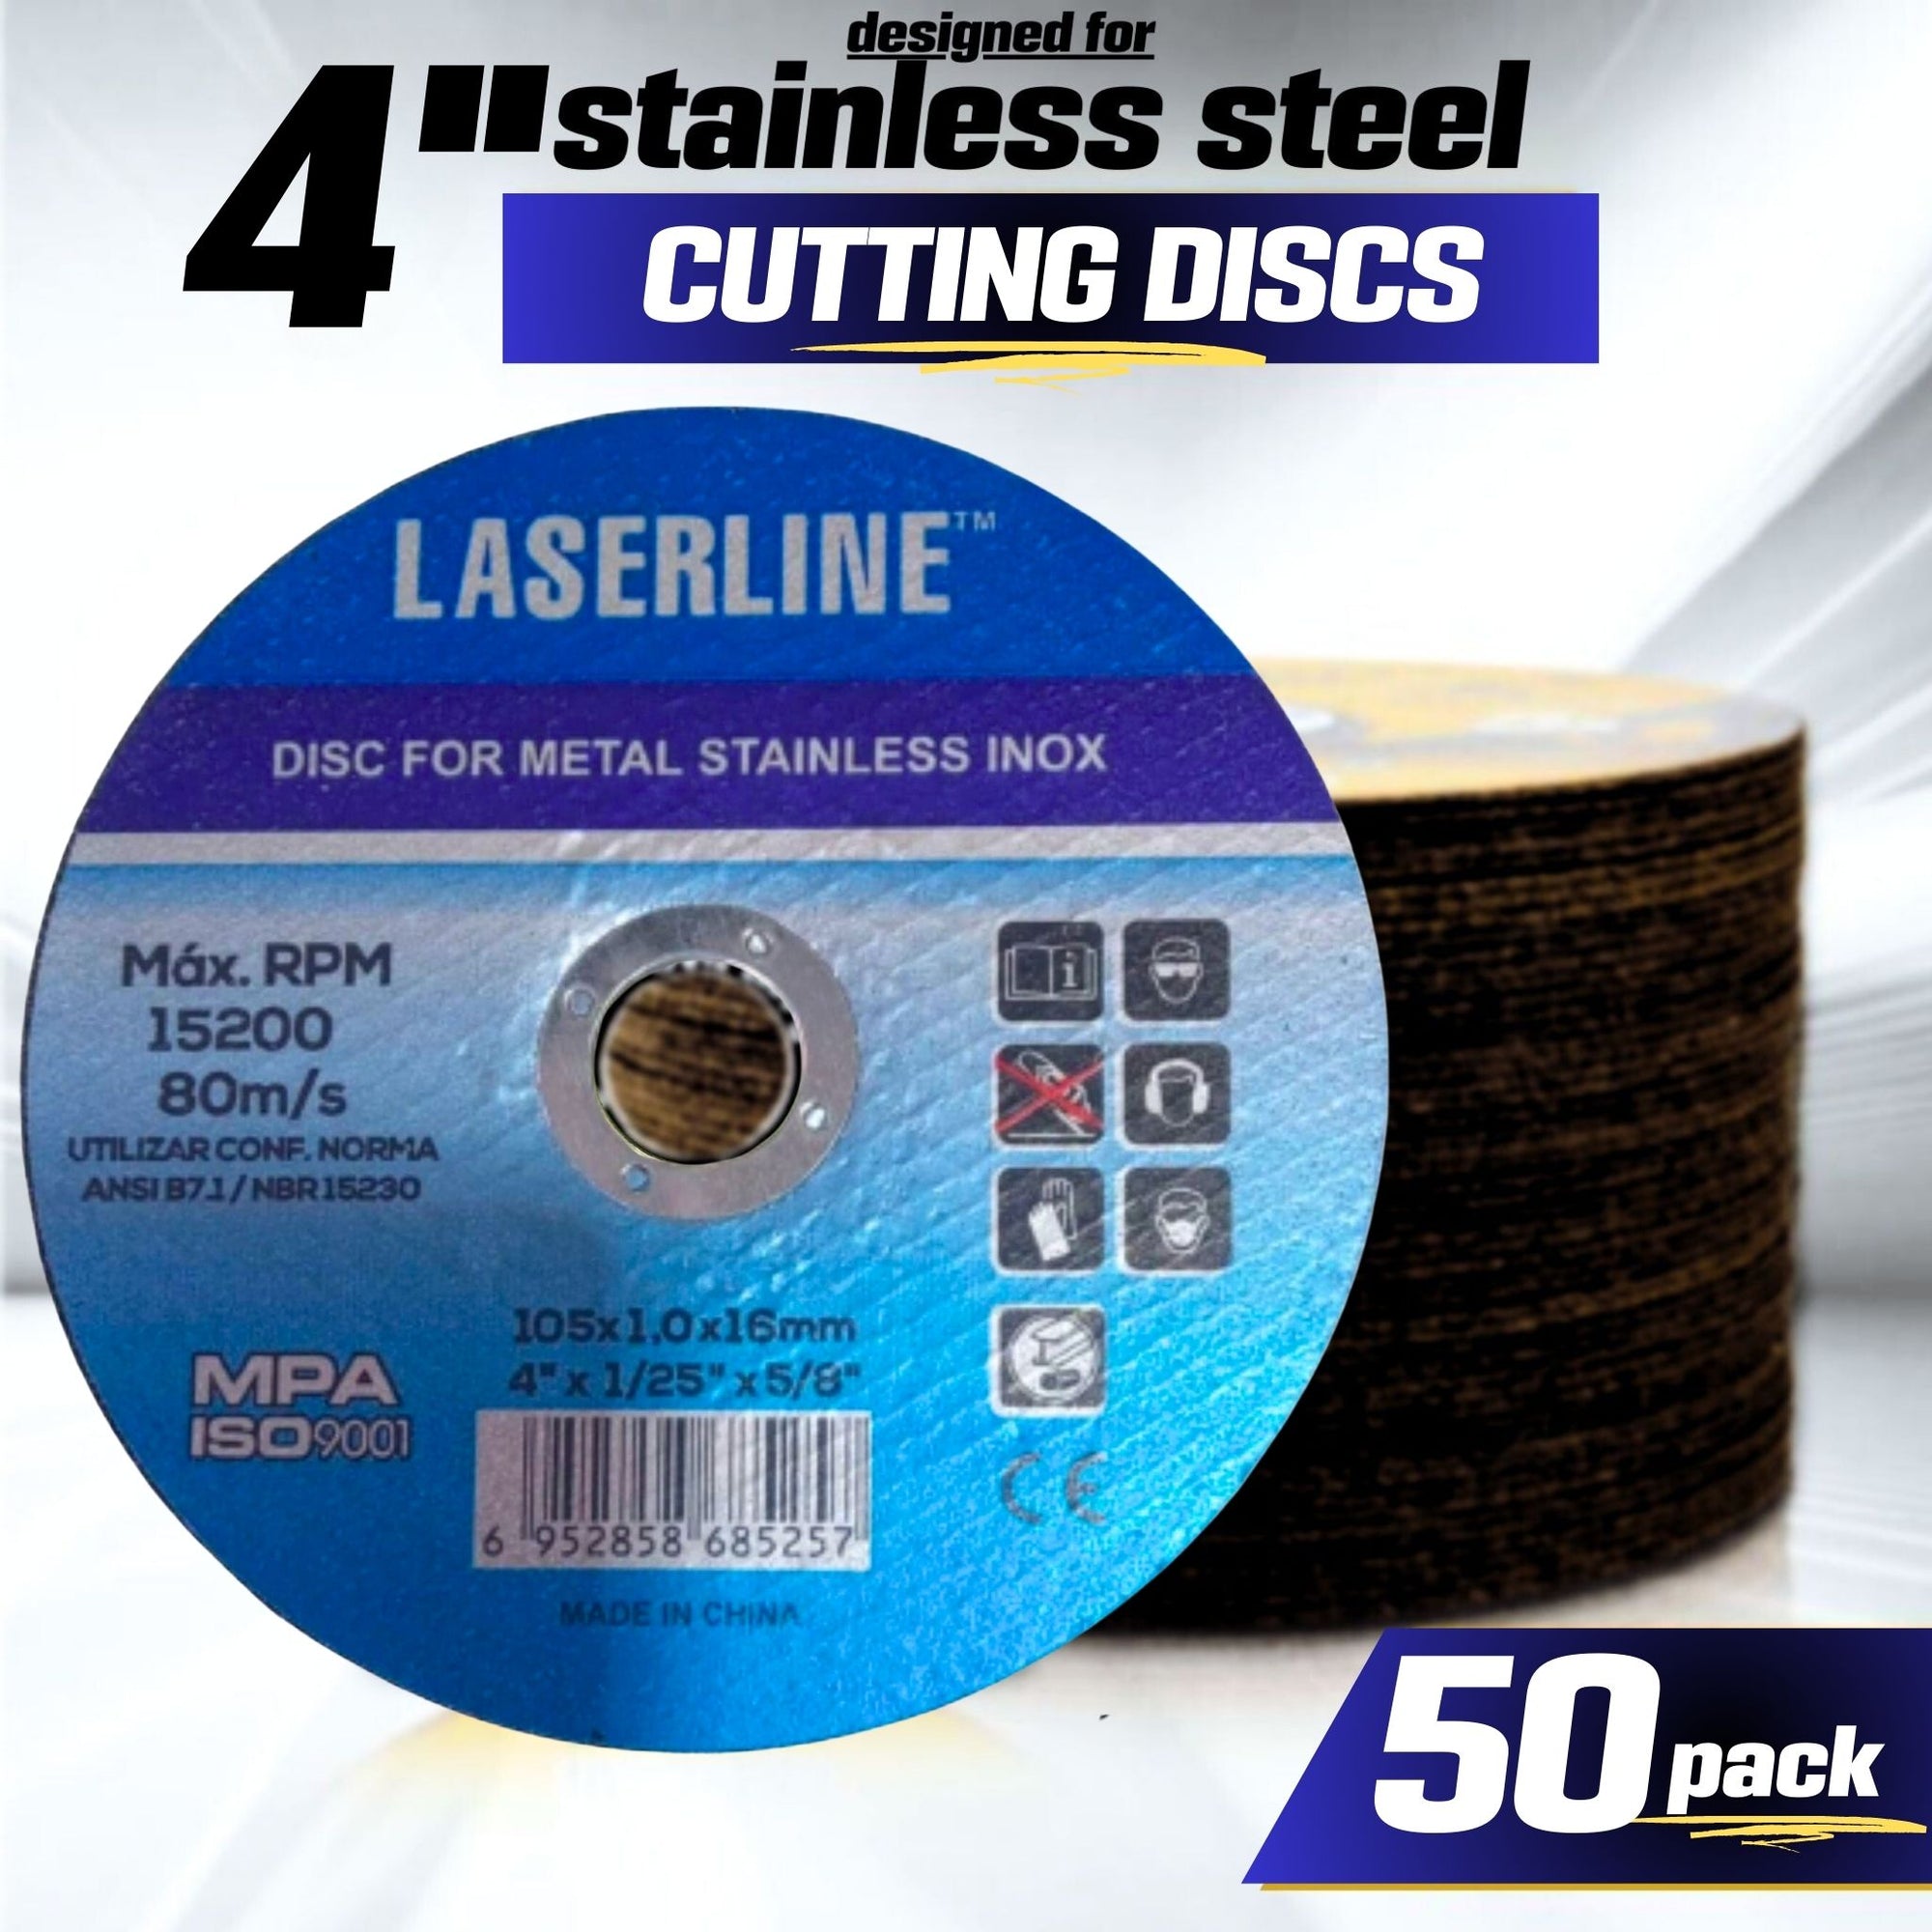 50 PACK - Stainless Steel Cutting Disc - 105mm - South East Clearance Centre